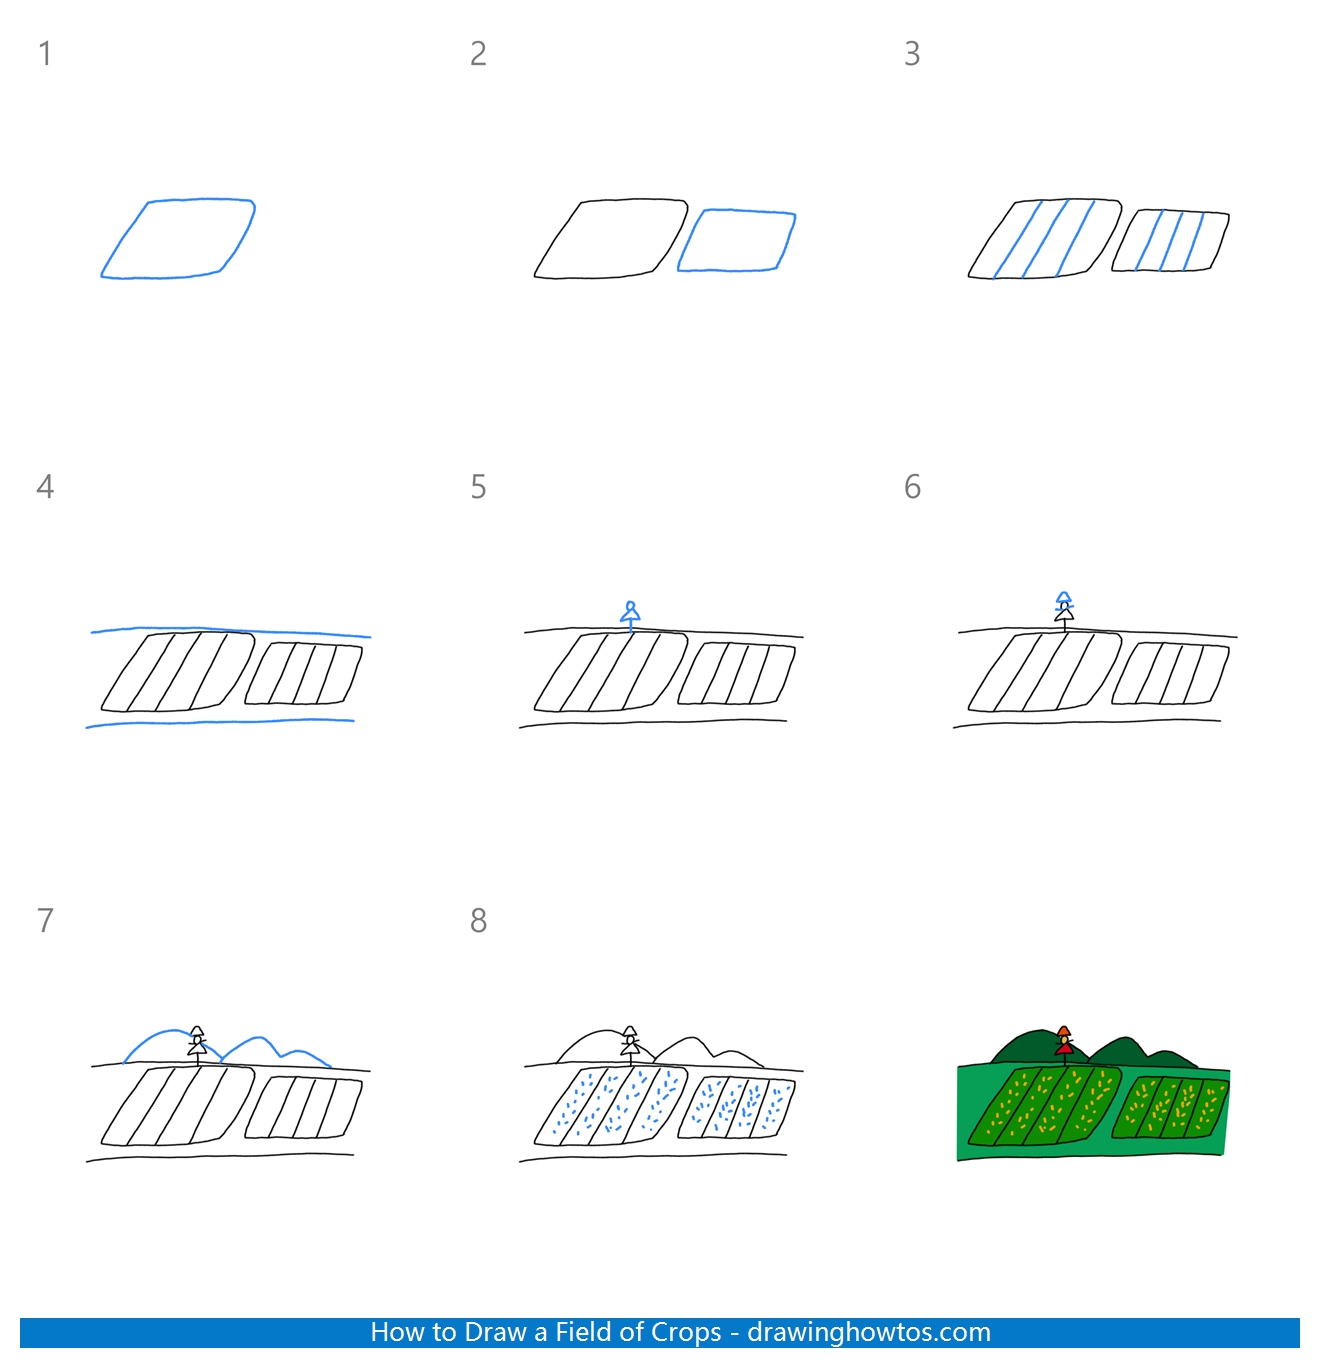 How to Draw Agricultural Fields Step by Step